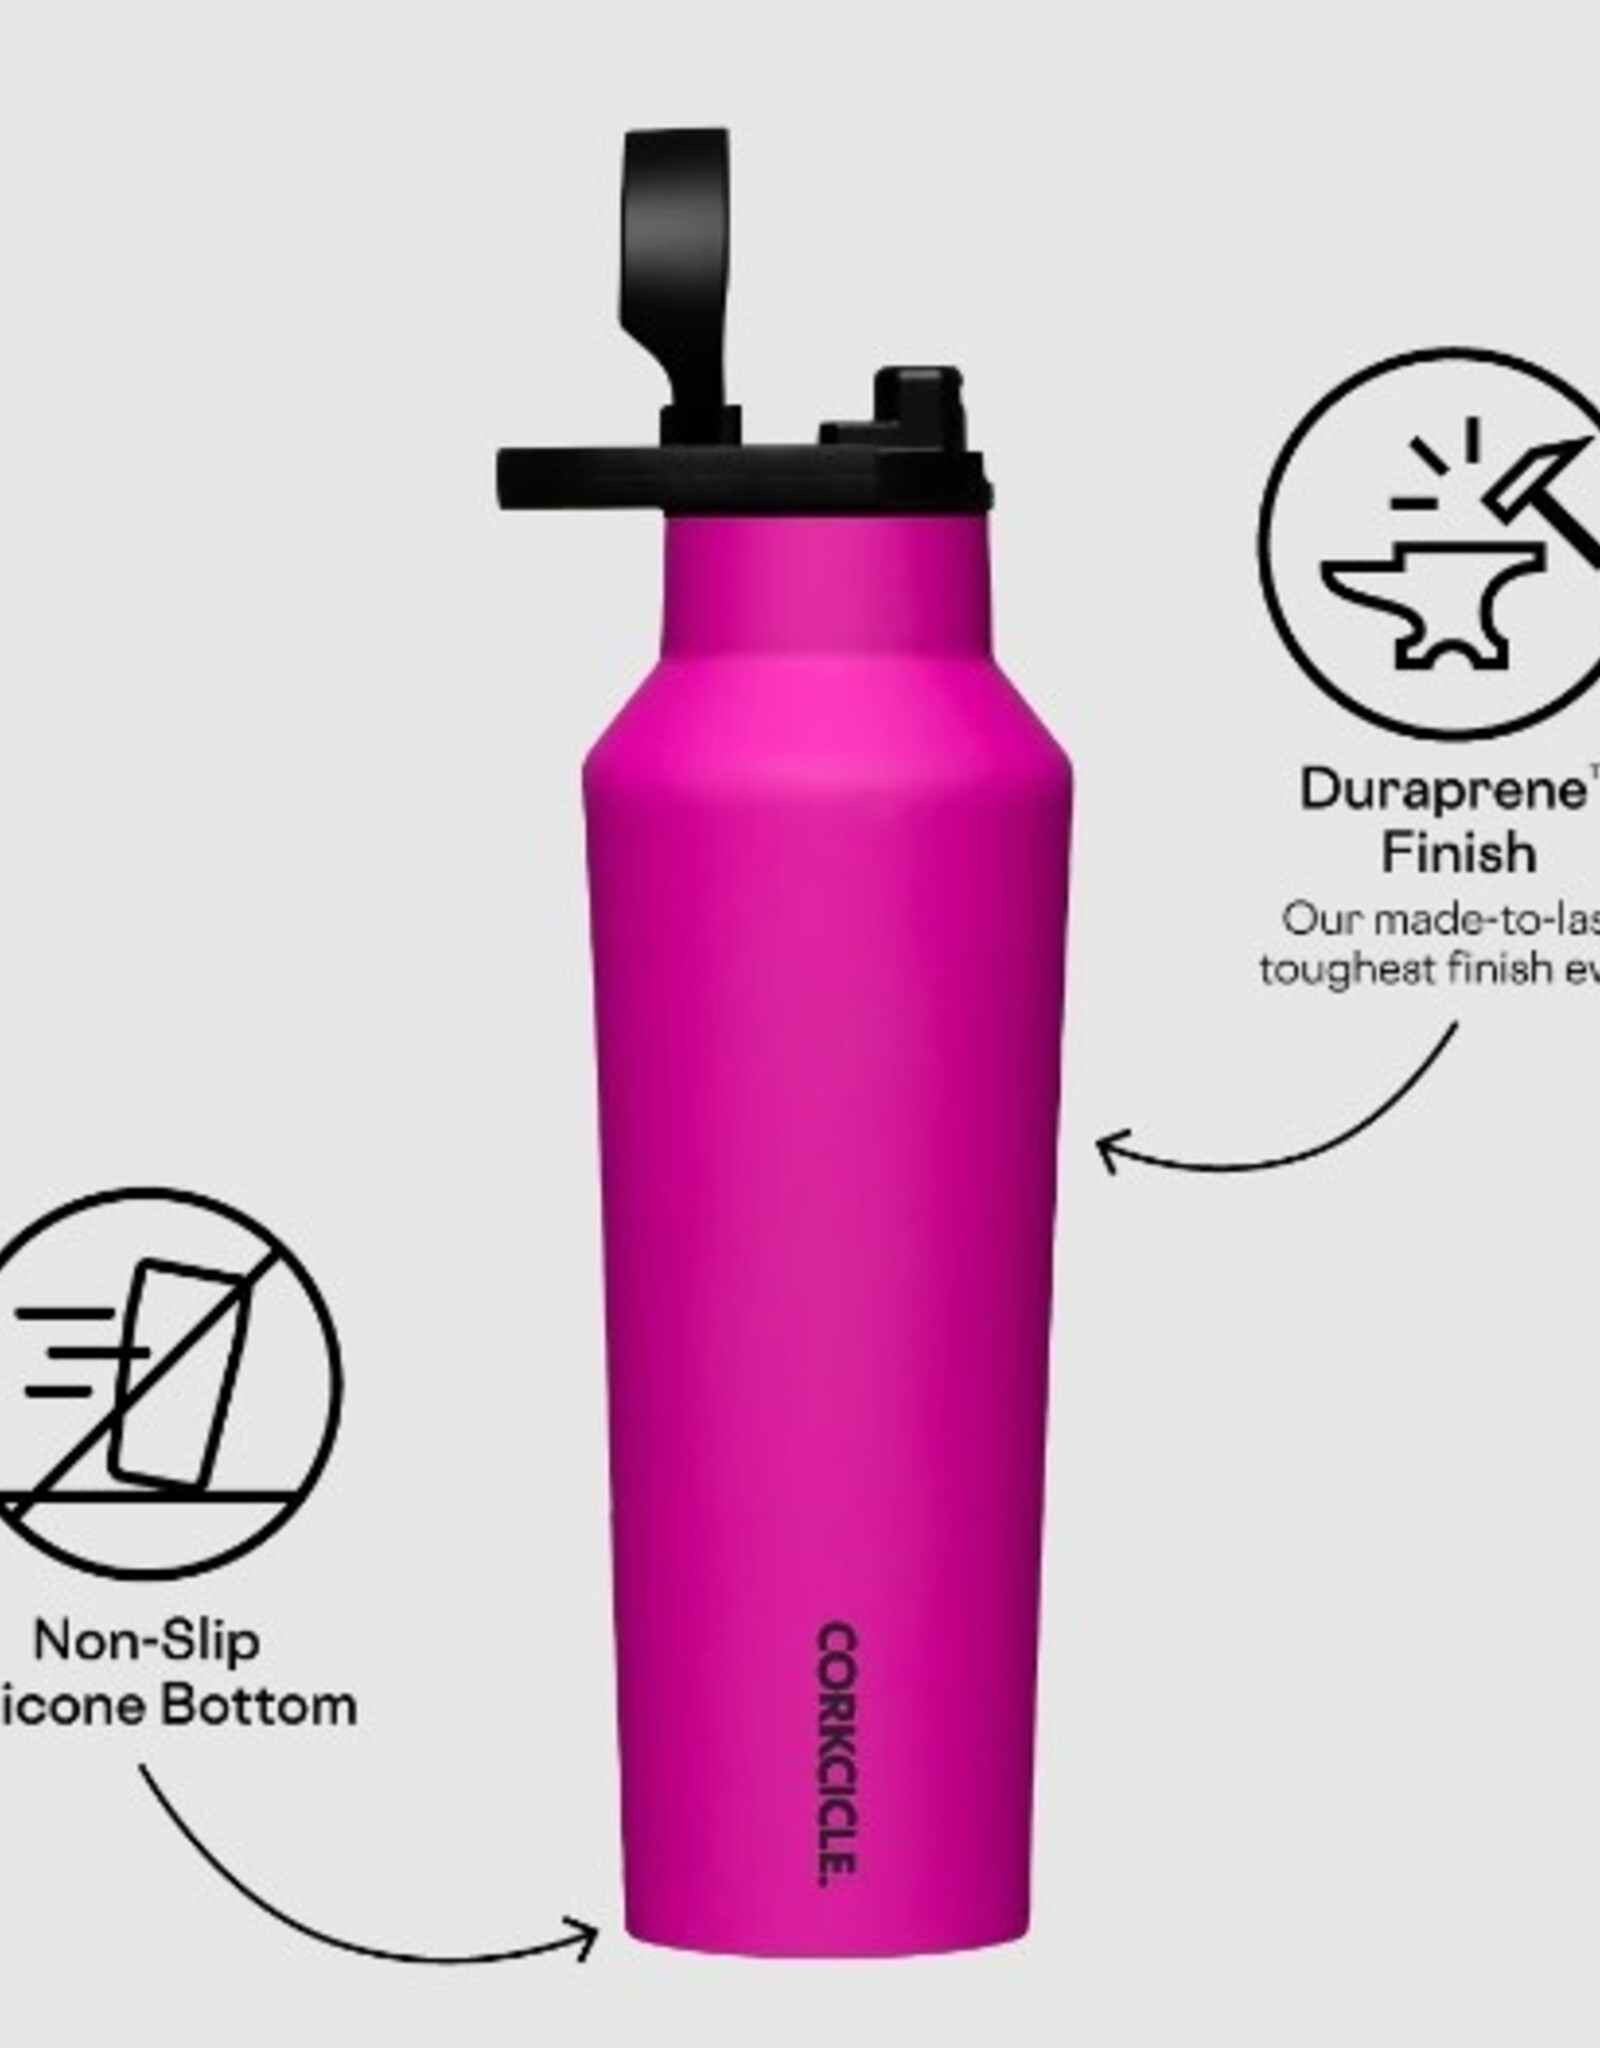 Corkcicle - 24oz Cold Cup Berry Punch